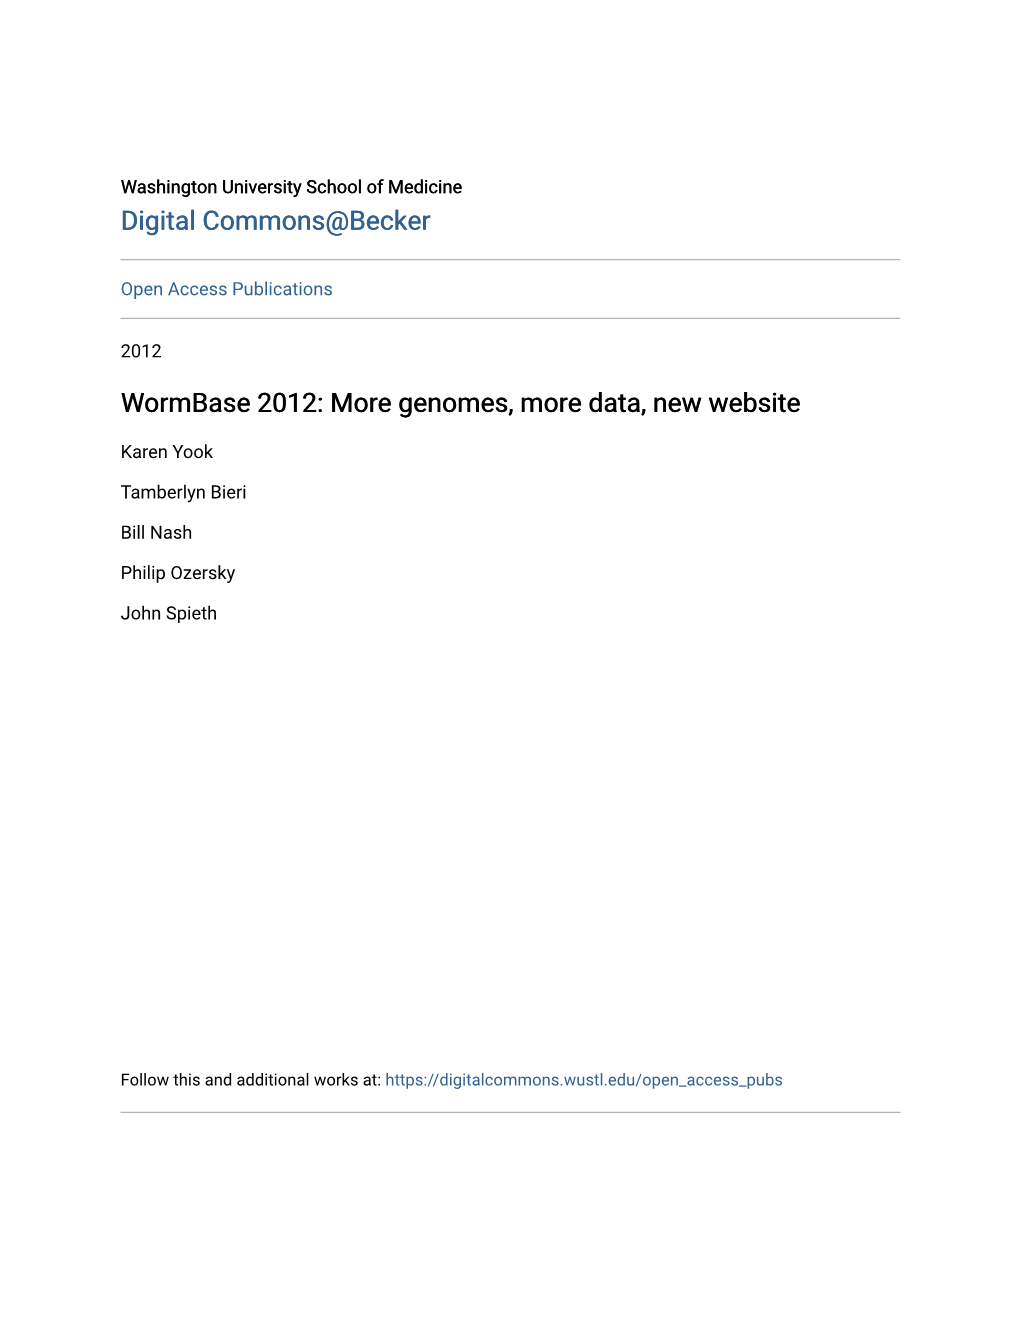 Wormbase 2012: More Genomes, More Data, New Website